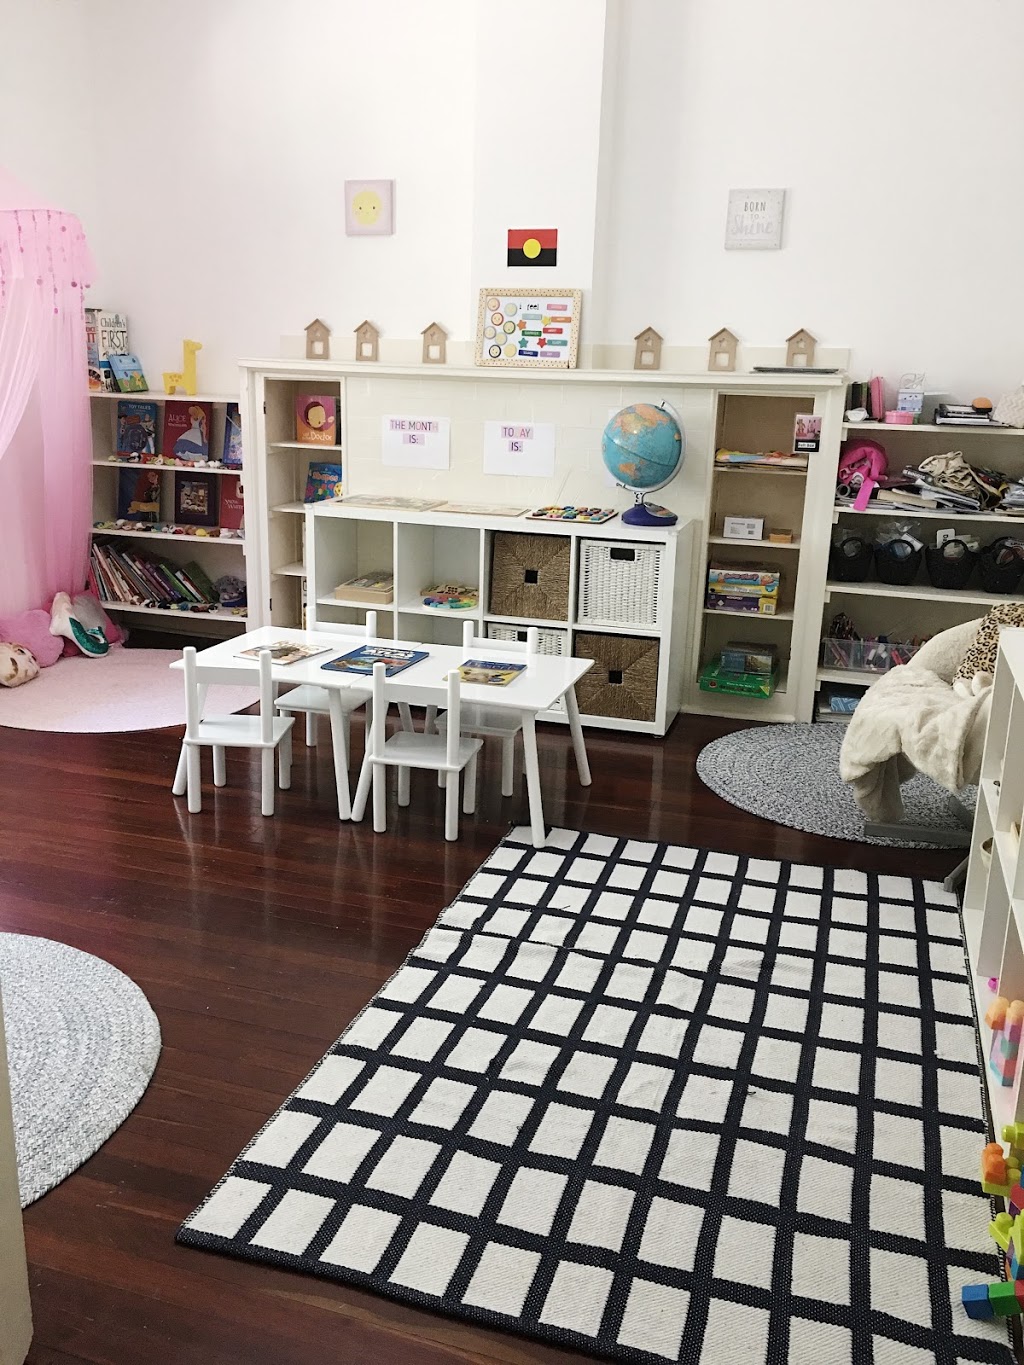 Chatswood Early Learning Academy |  | 21 Centennial Ave, Chatswood NSW 2067, Australia | 0425882687 OR +61 425 882 687